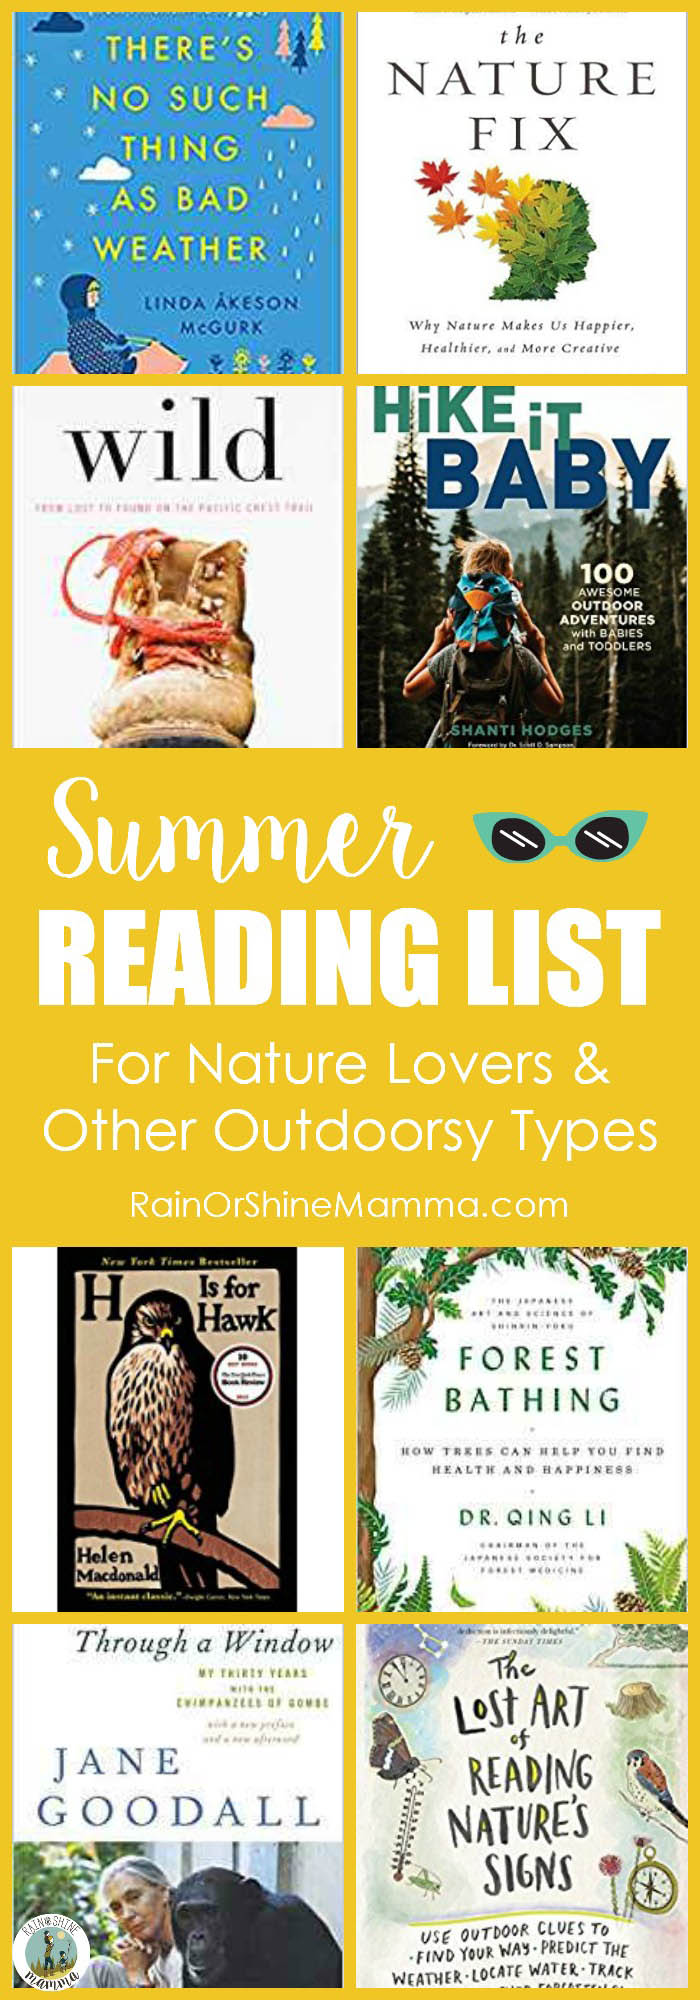 Summer Reading List for Nature Lovers & Other Outdoorsy Types. Eight great books that will inspire you to get outside and immerse yourself in nature. #readinglist #booktips #naturebooks